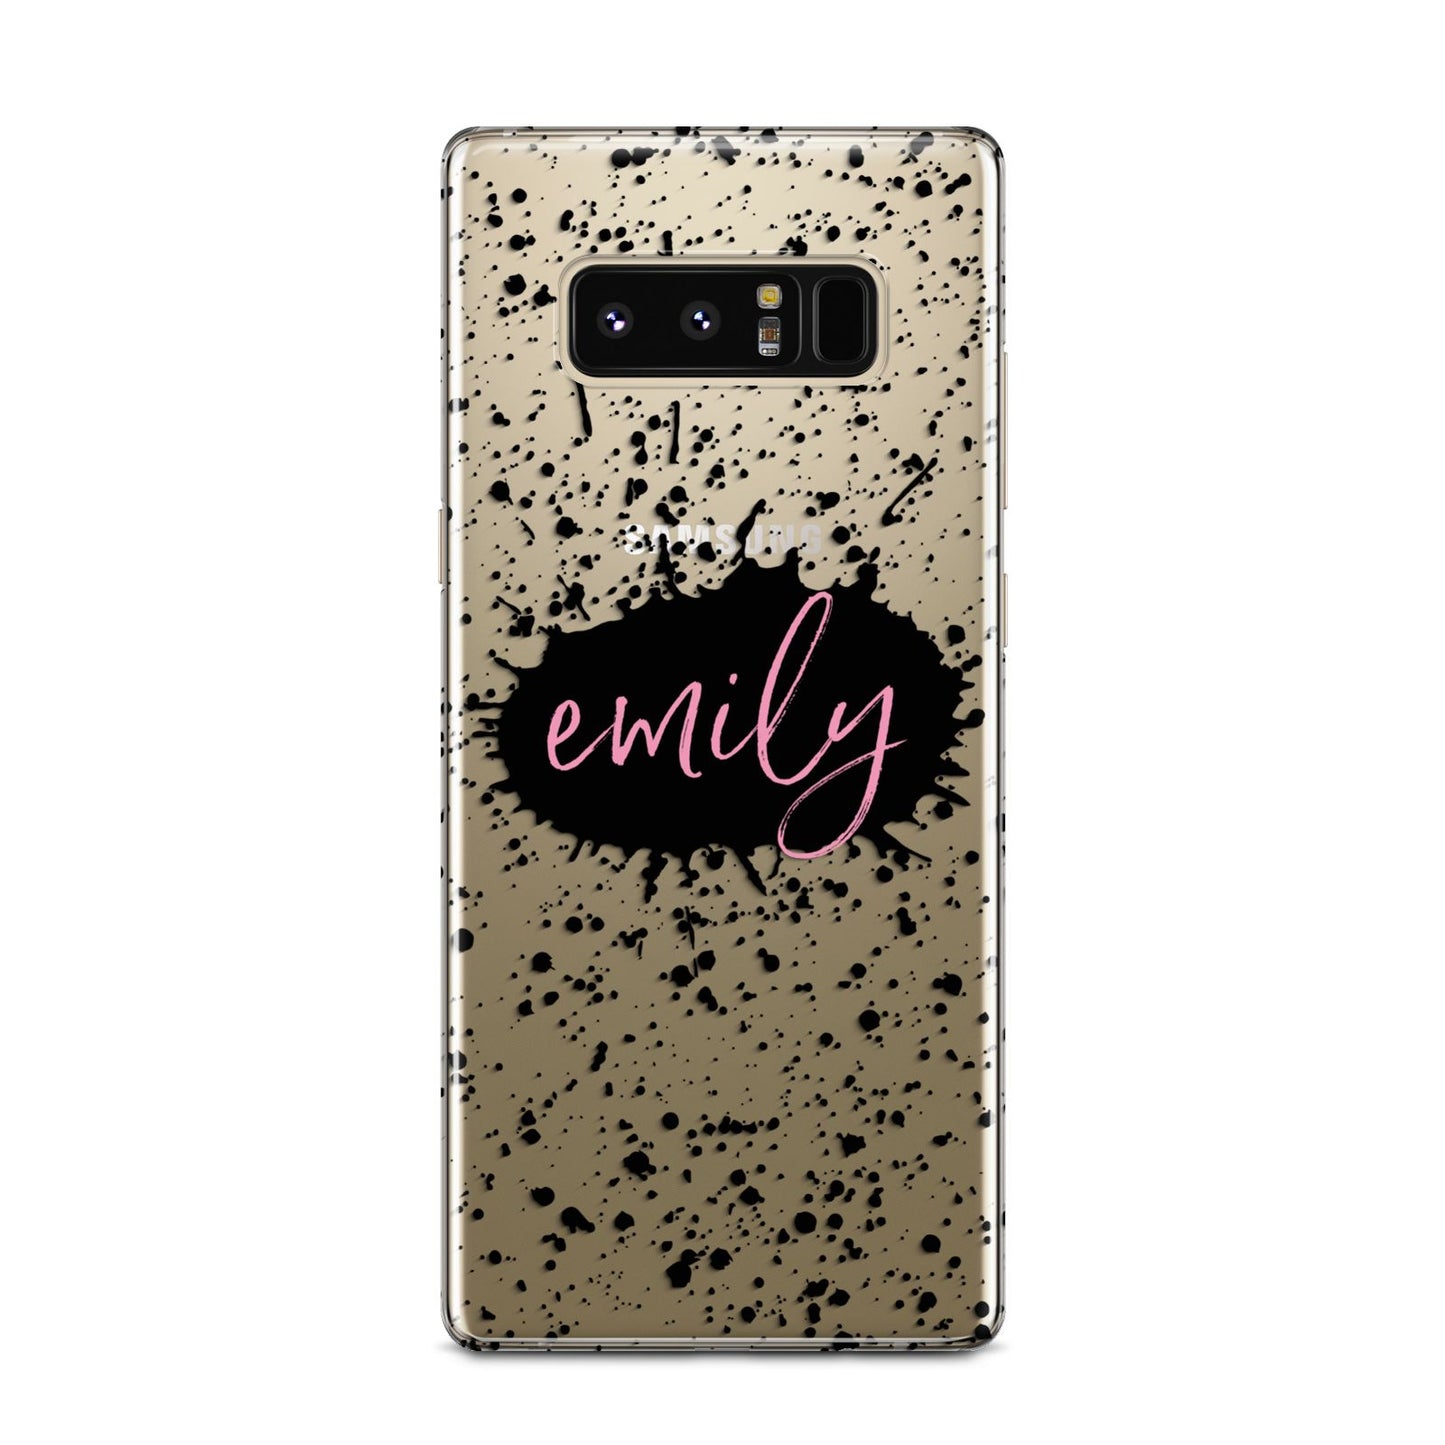 Personalised Black Ink Splat Clear Name Samsung Galaxy Note 8 Case